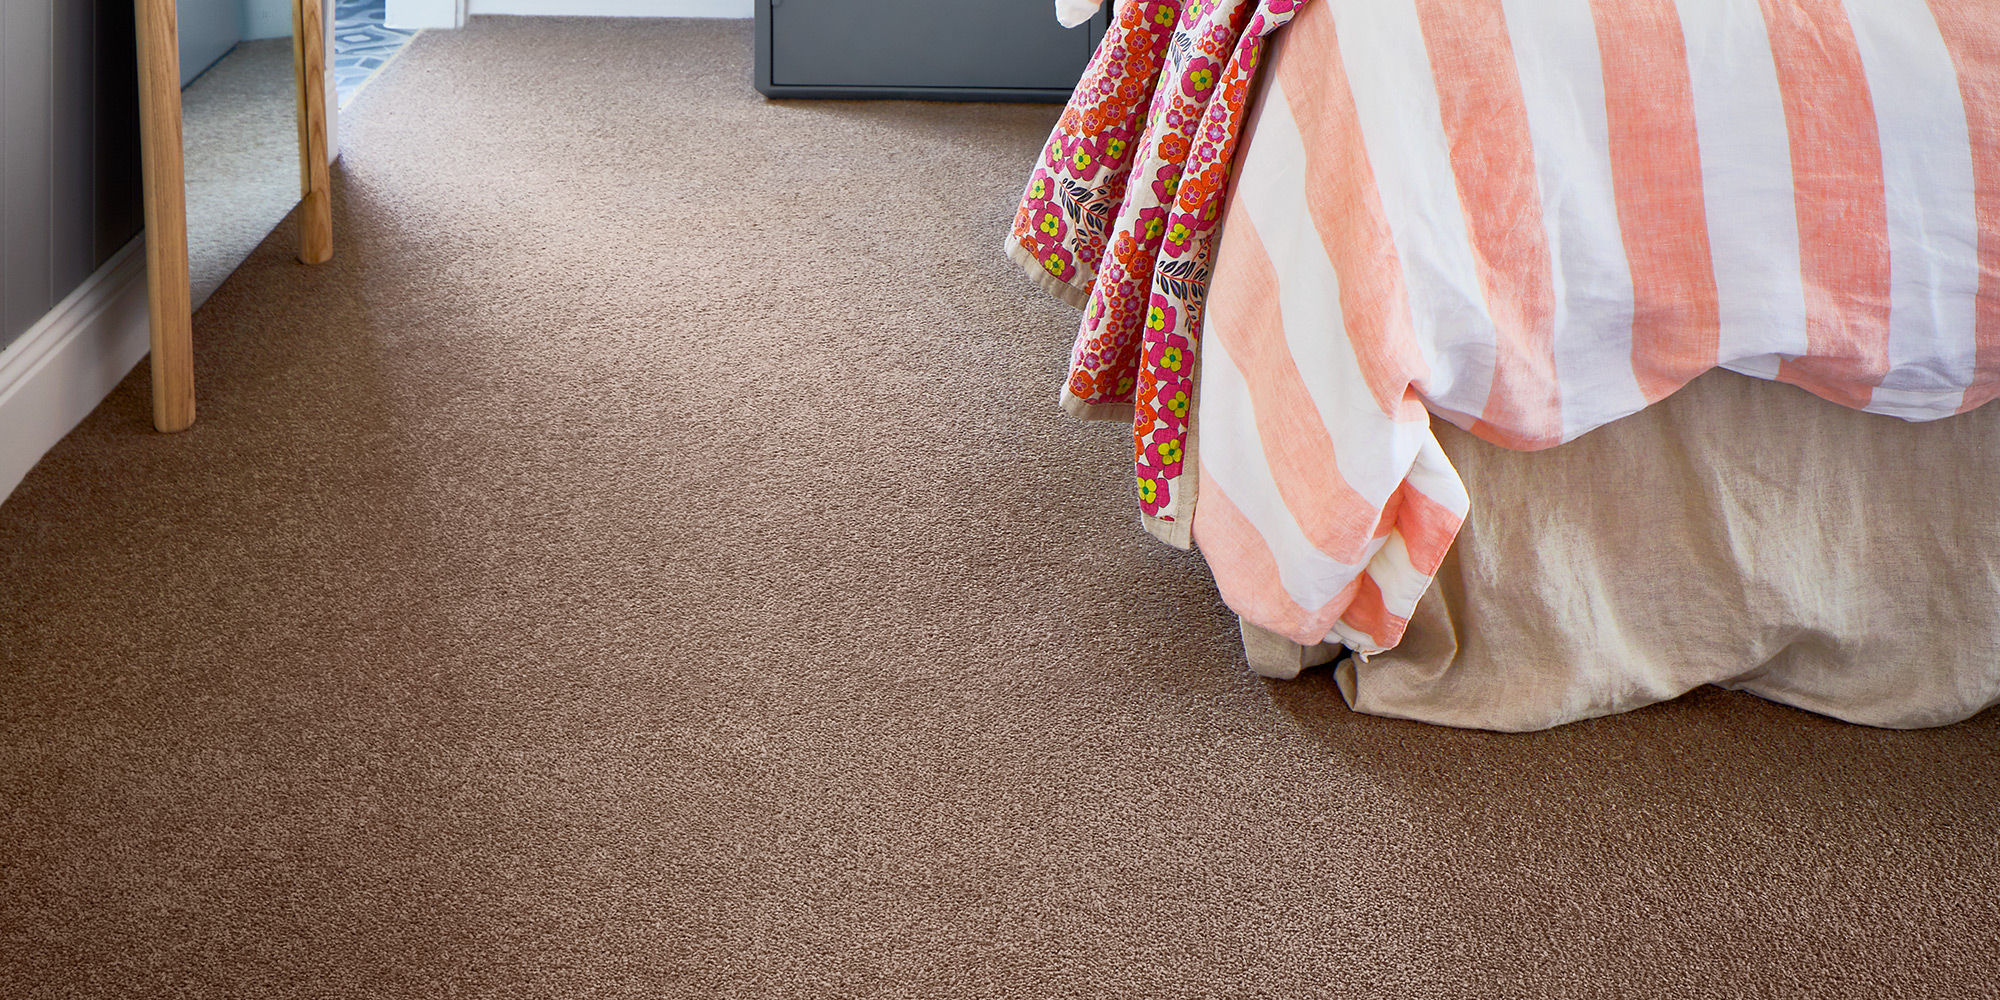 Classic City Polyester Carpet - Godfrey Hirst Residential Carpet